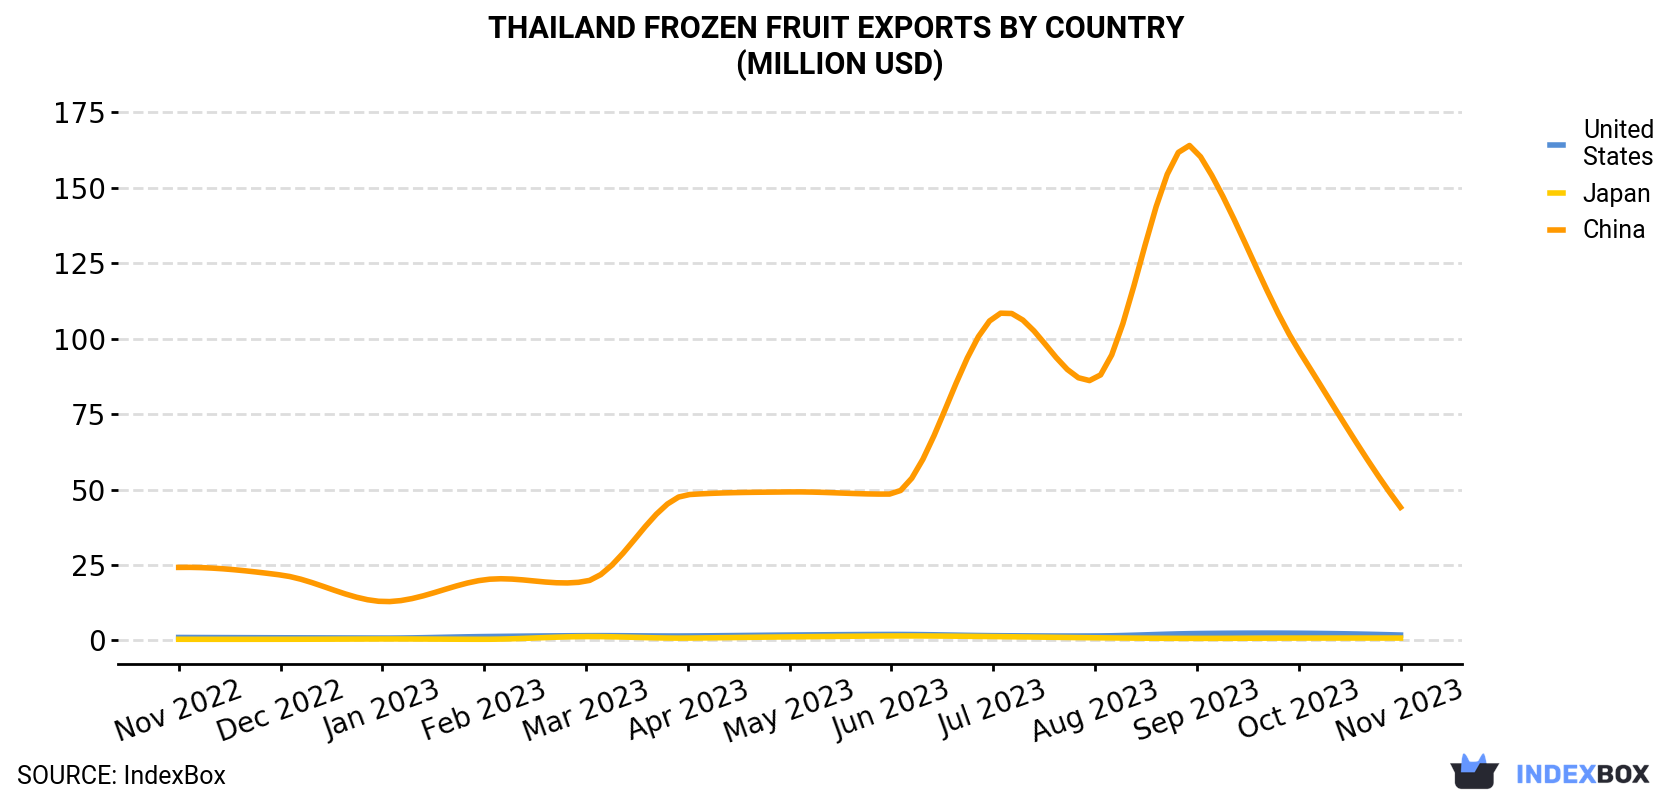 Thailand Frozen Fruit Exports By Country (Million USD)